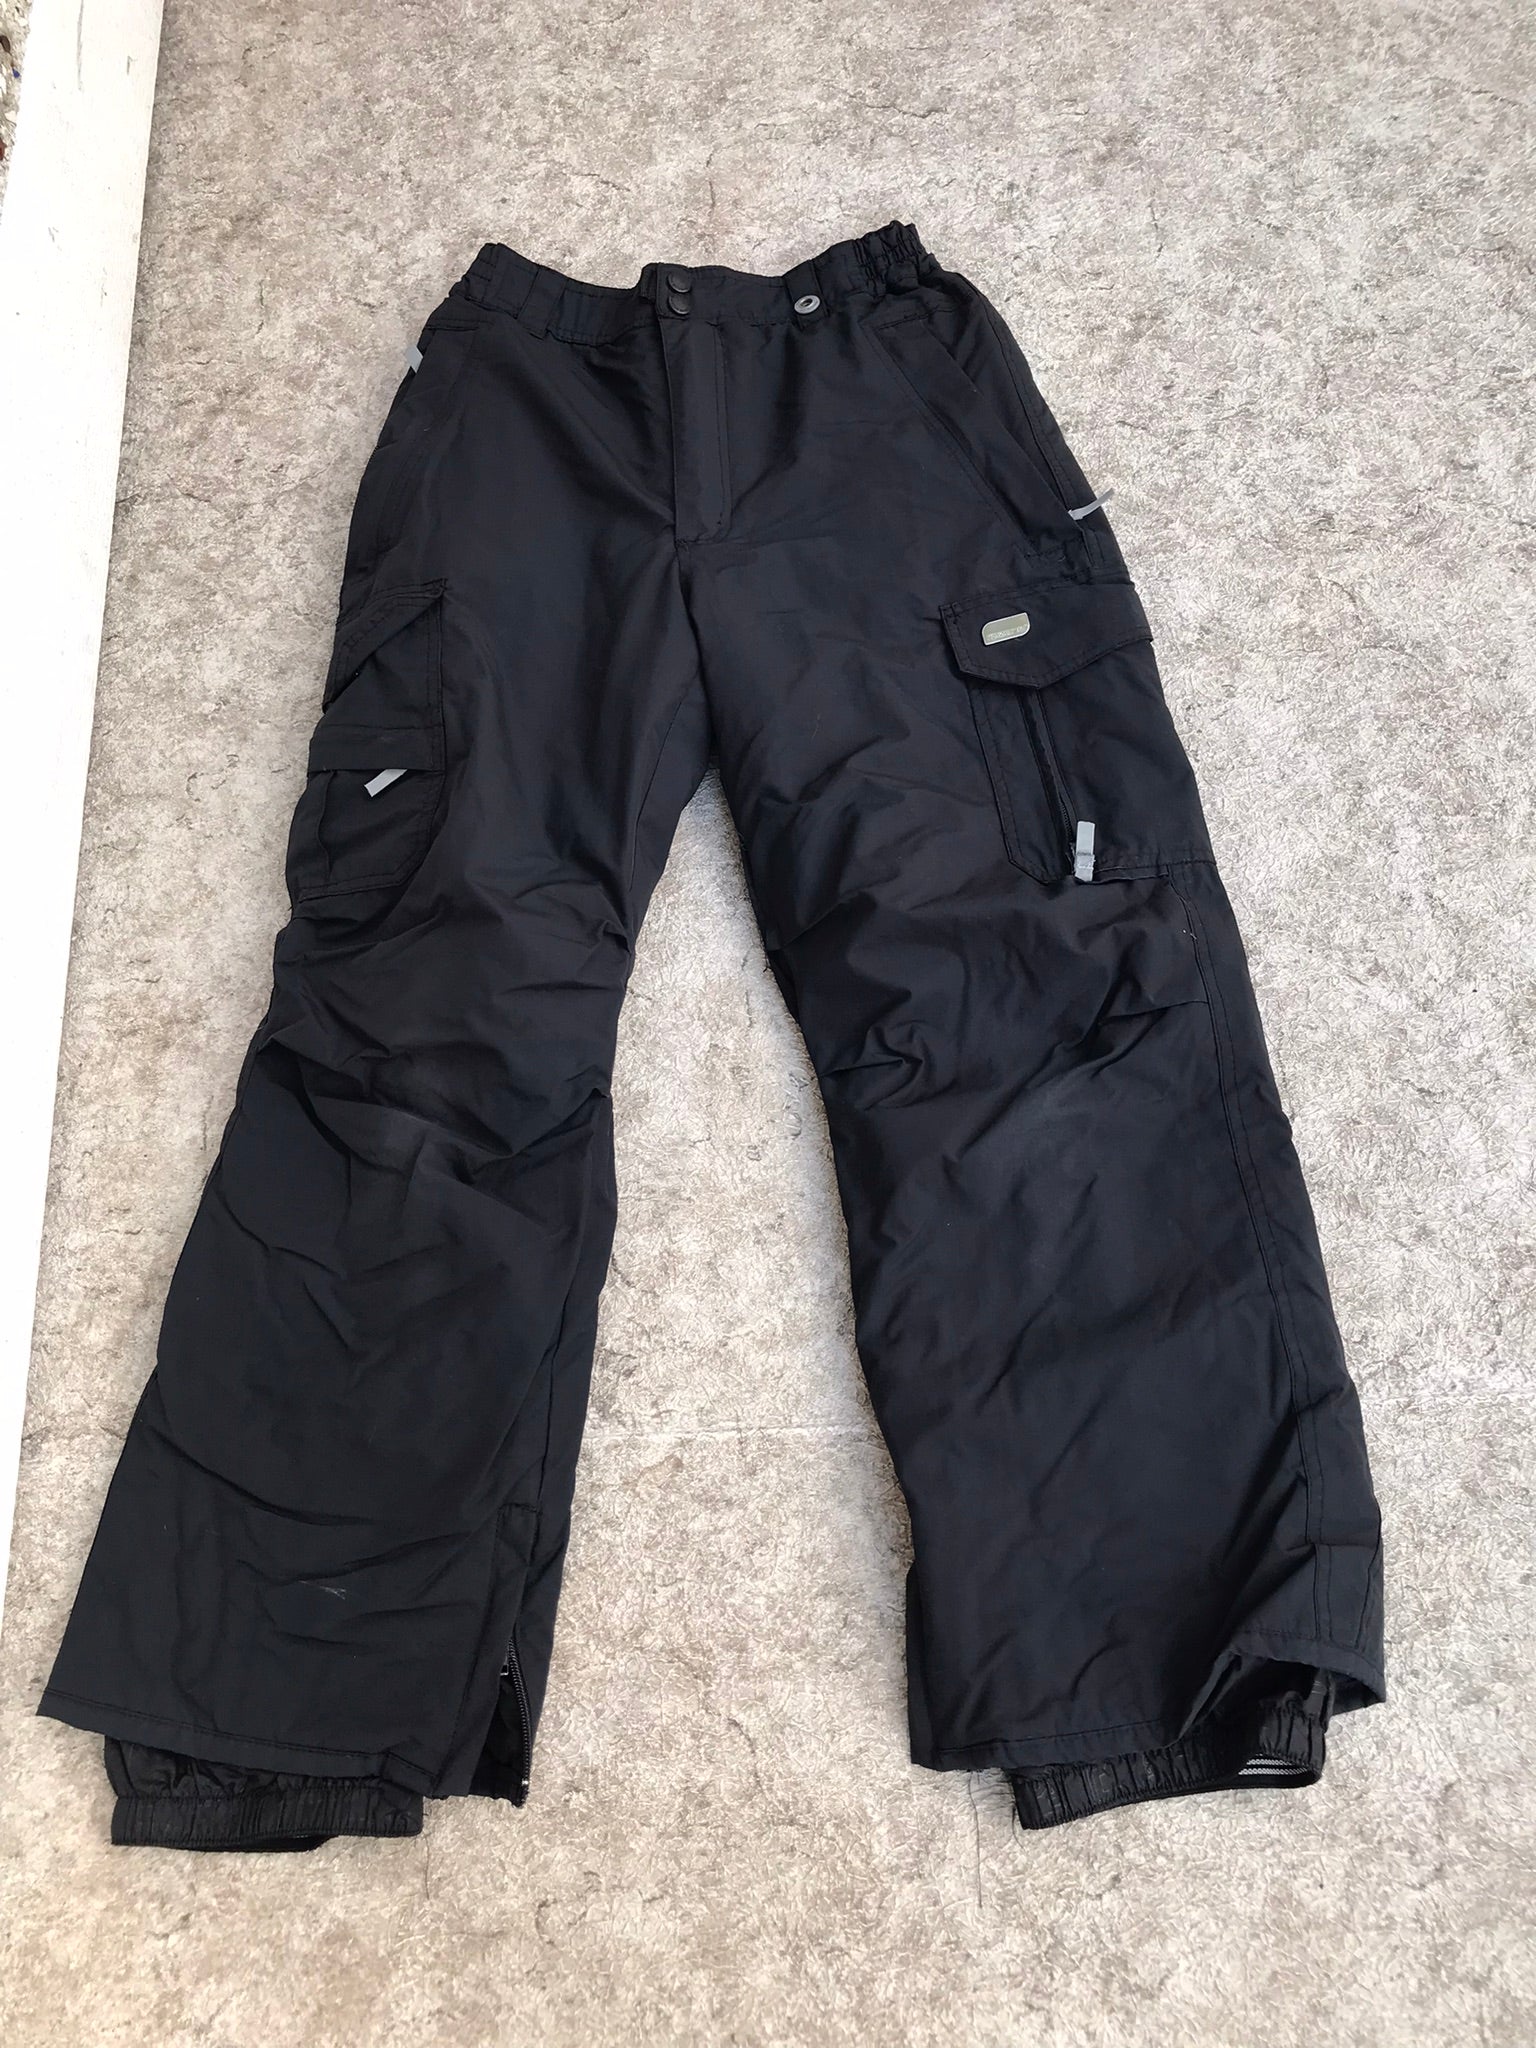 Snow Pants Child Size 12 Large Youth Ripzone Black Snowboarding